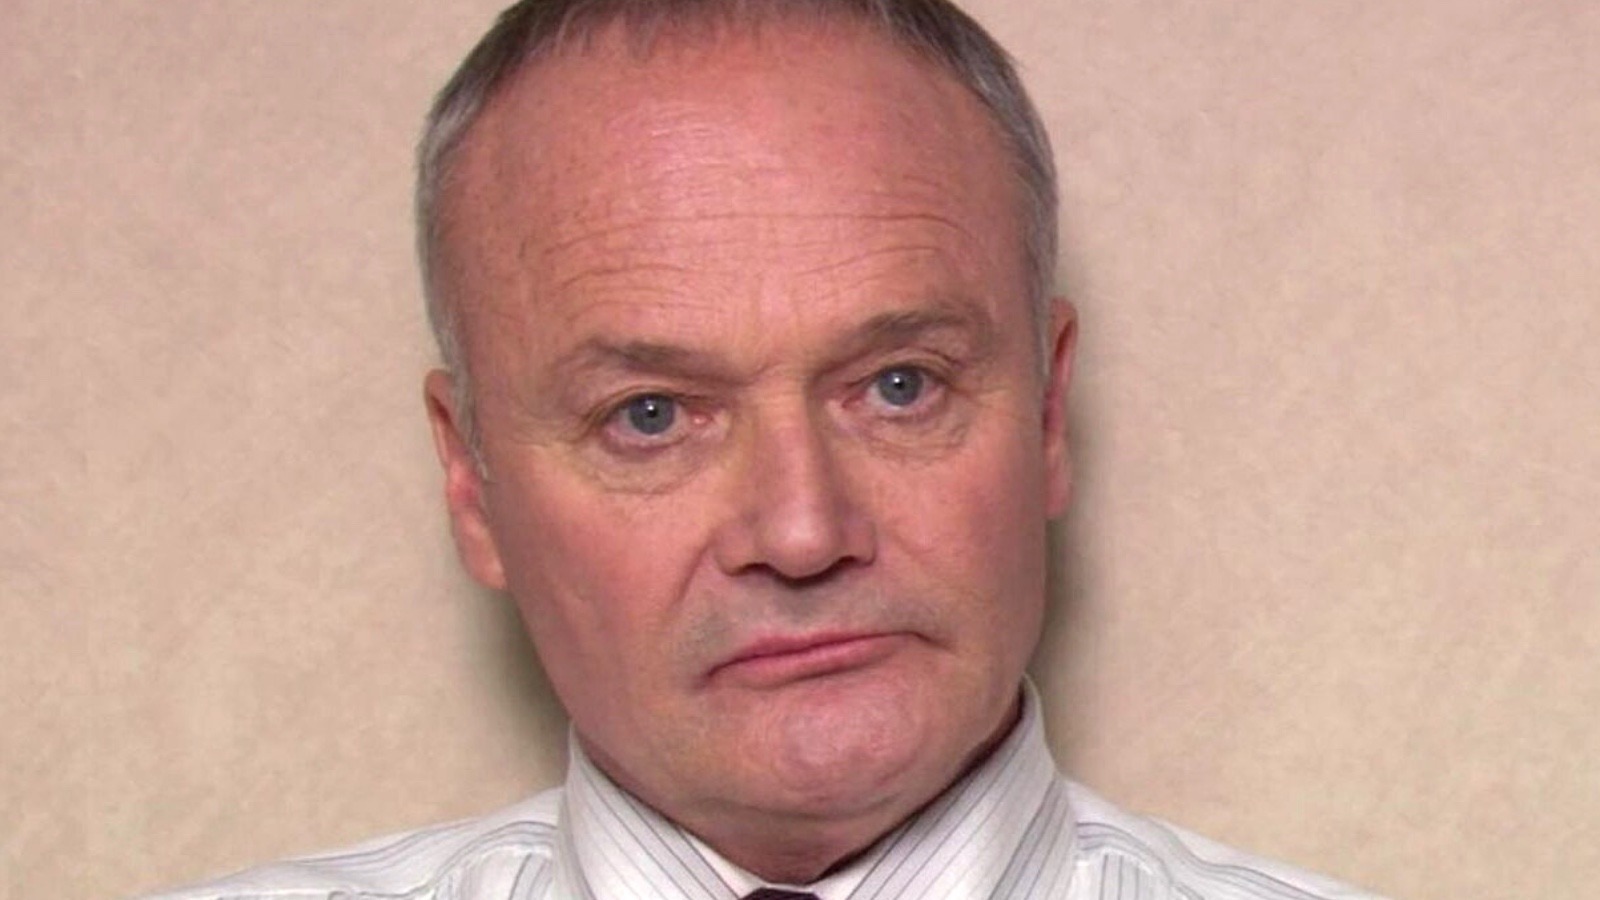 Devon Abner's Depature On 'The Office' Gave Rise To Creed Bratton